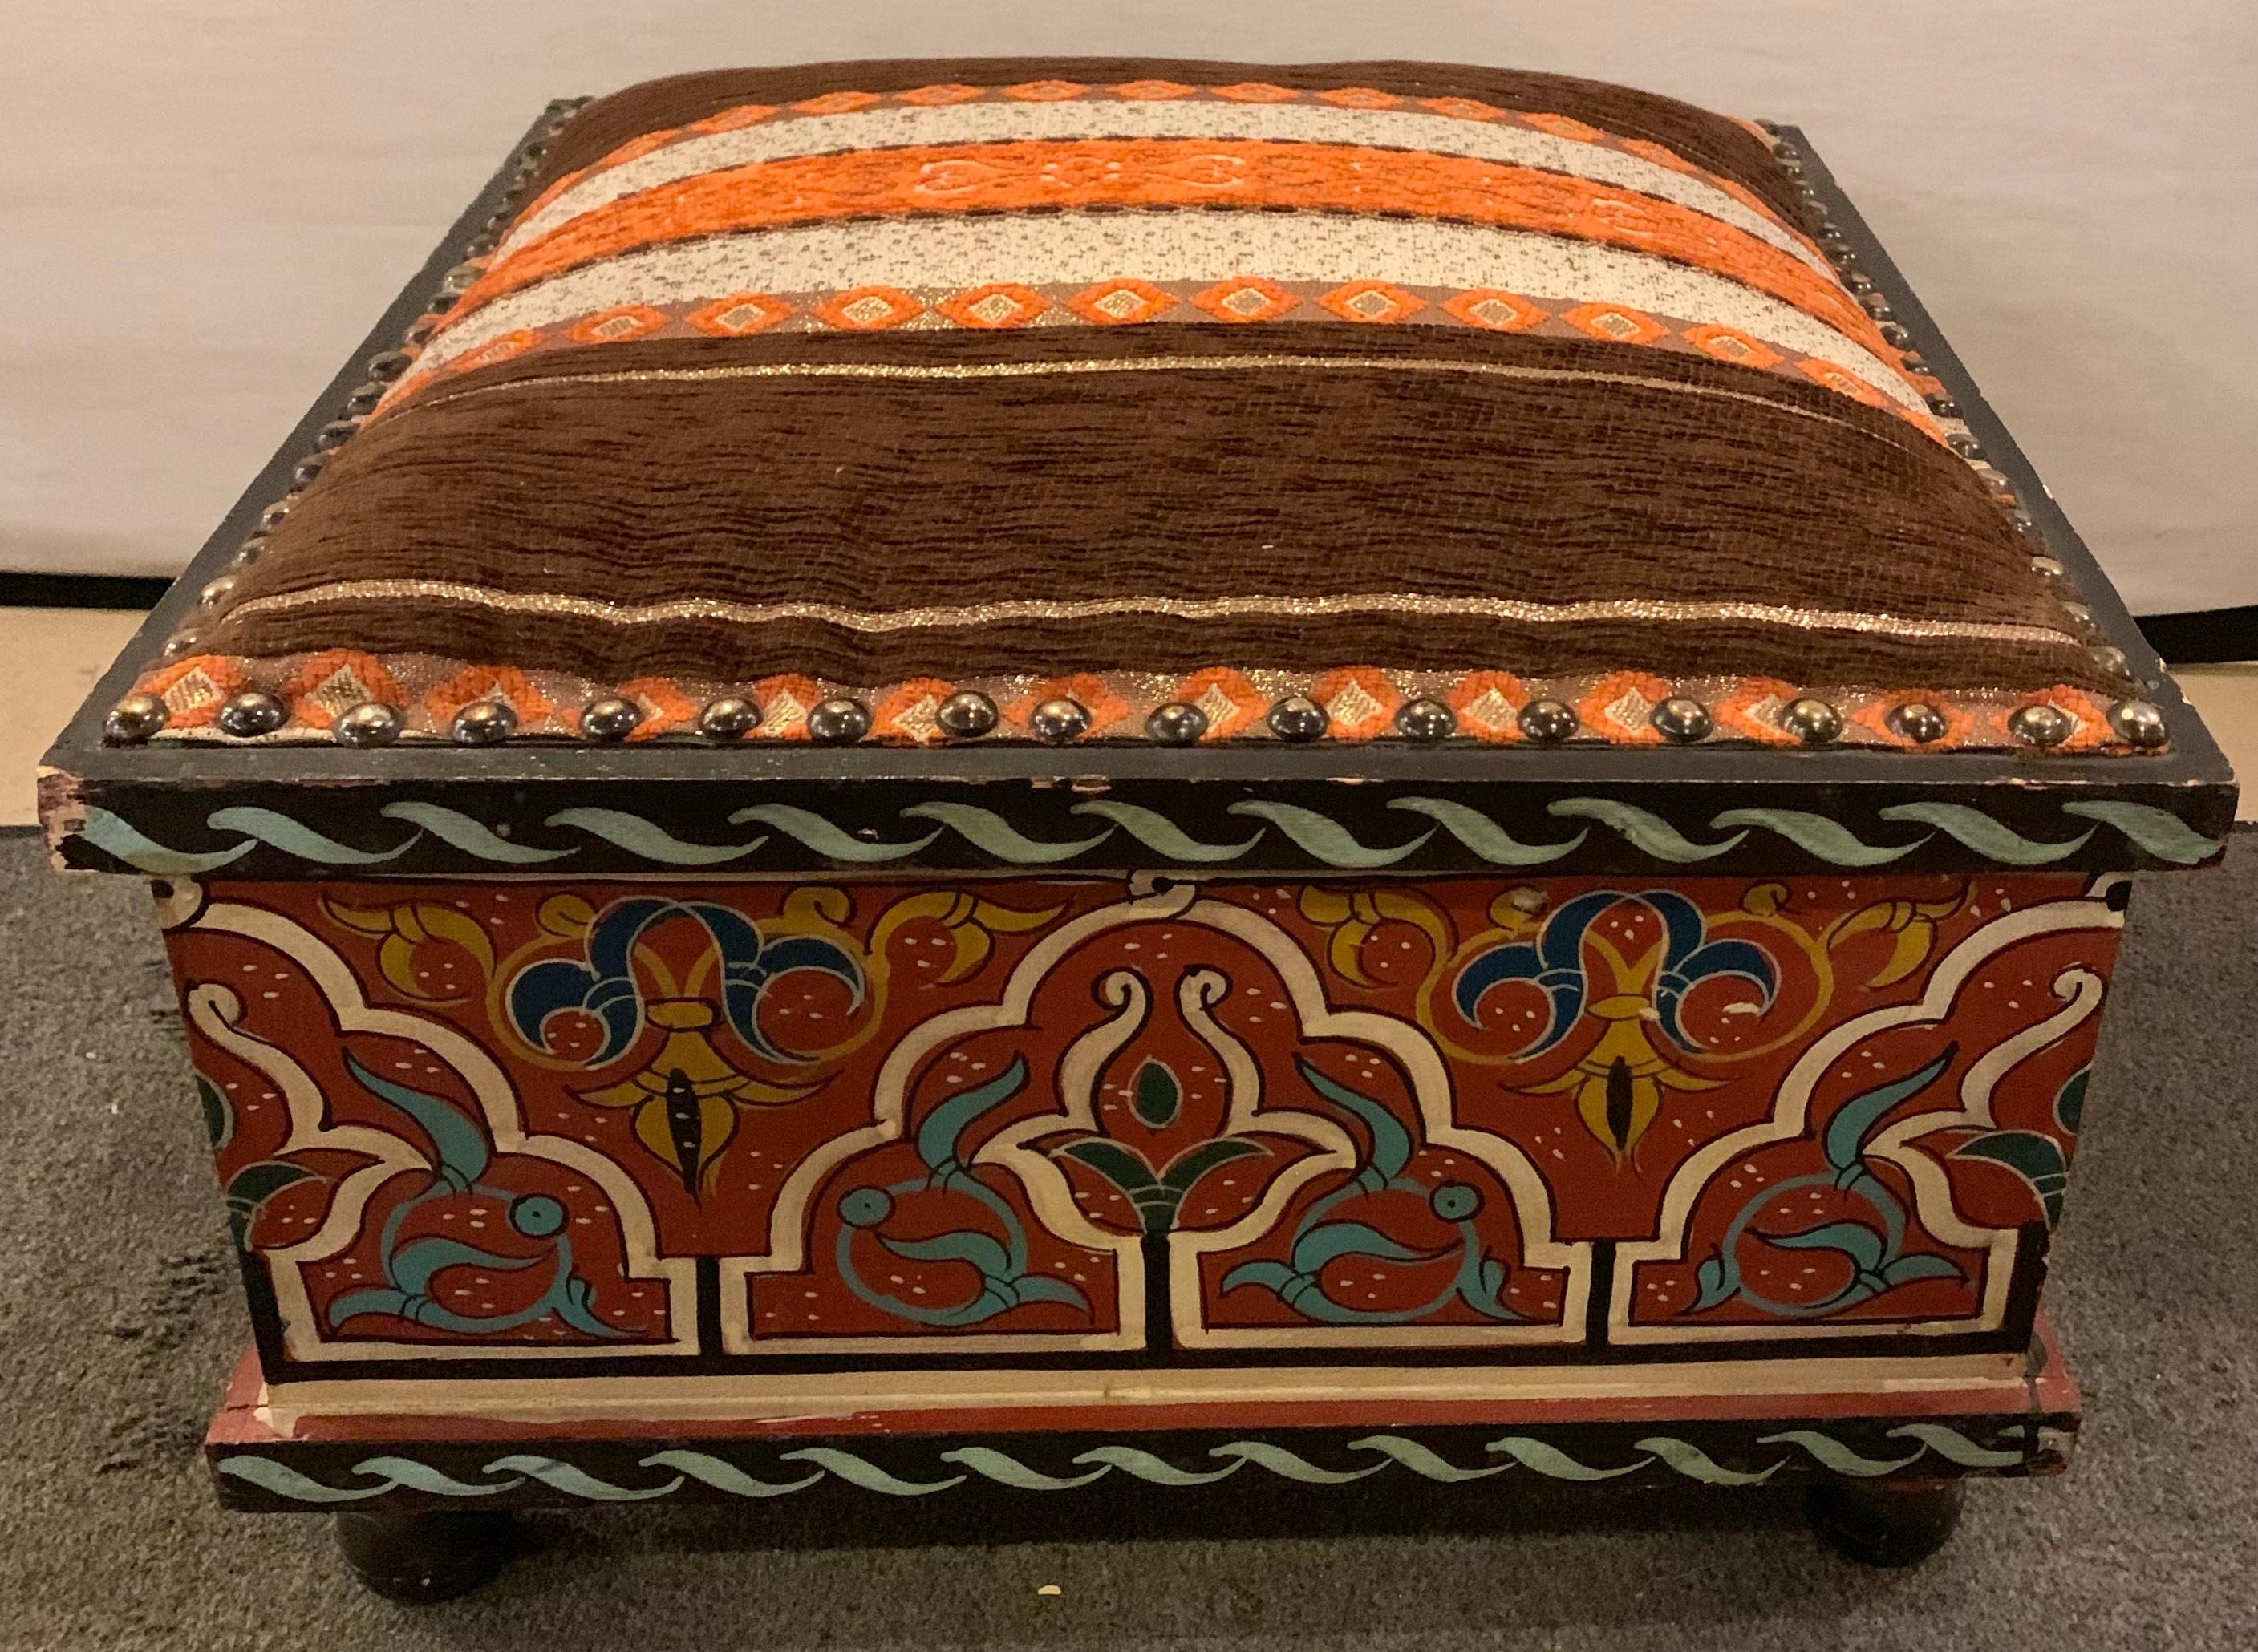 Done in the Moucharabieh style (an element of traditional Arabic architecture used since the Middle Ages) using hand painted wood.
The pleasing geometrical patterns and Moorish arches combine with both vivid colors and earth tones to create a warm